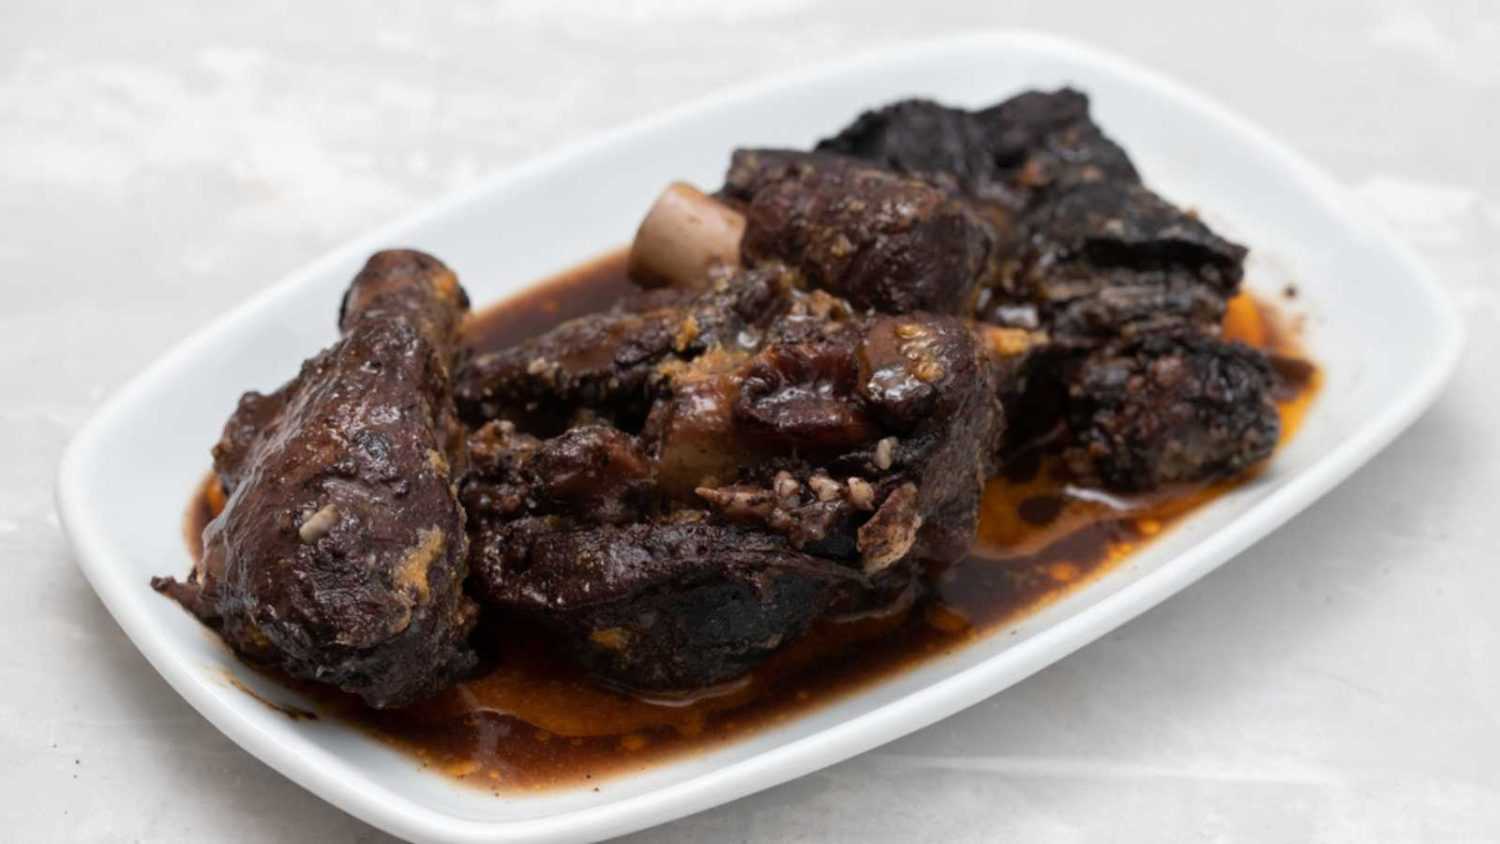 Old goat meat dish Chanfana, traditional portuguese, roasted in pans.